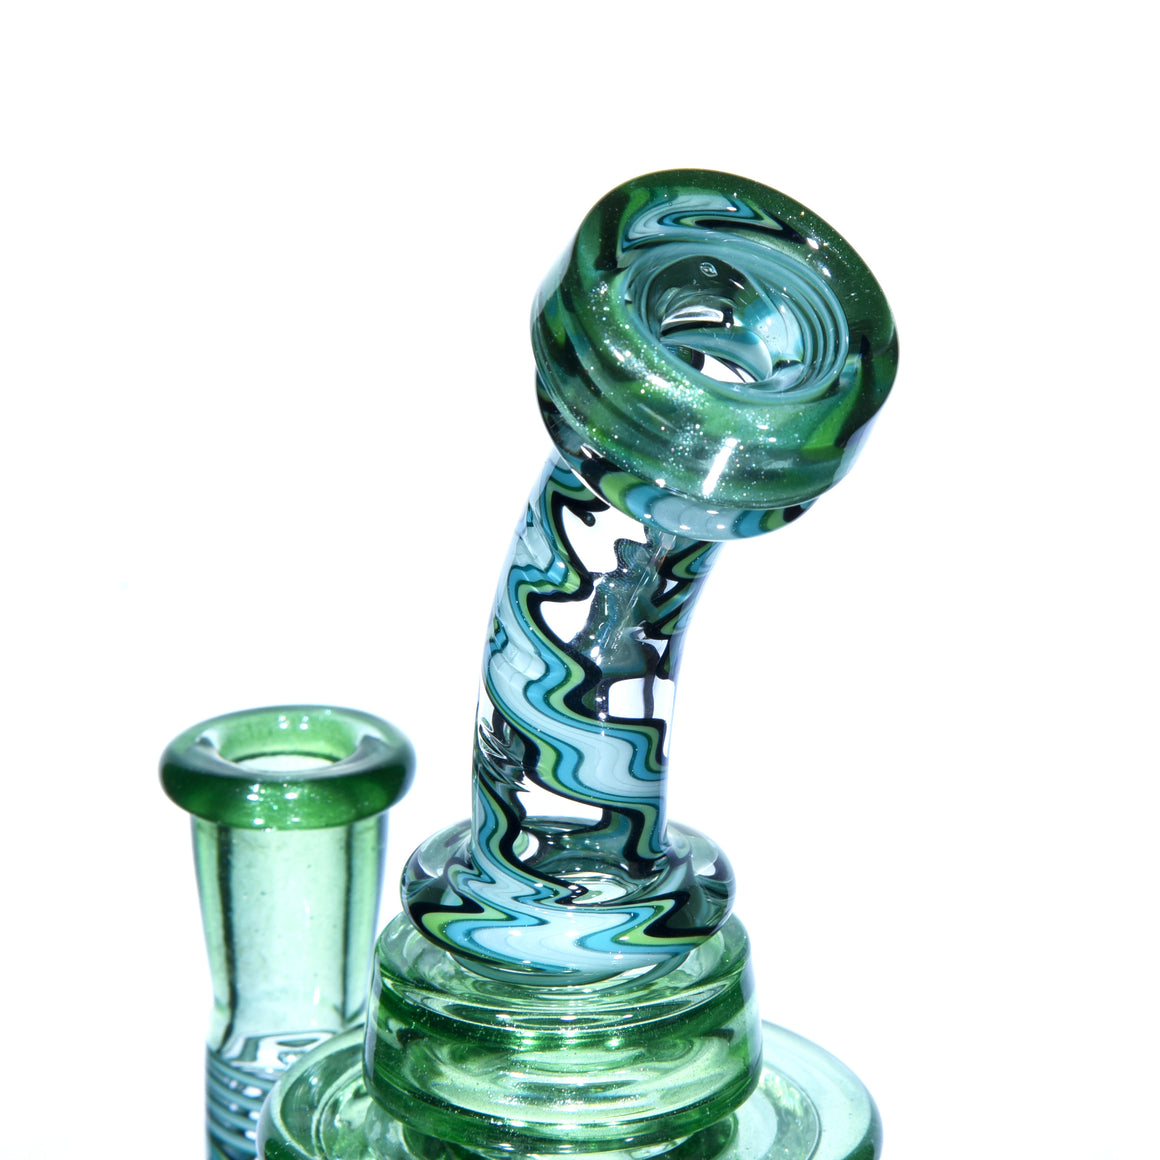 Fully-worked Incycler w/ Gridded Perc - FtC/Green Stardust - 14mm Female